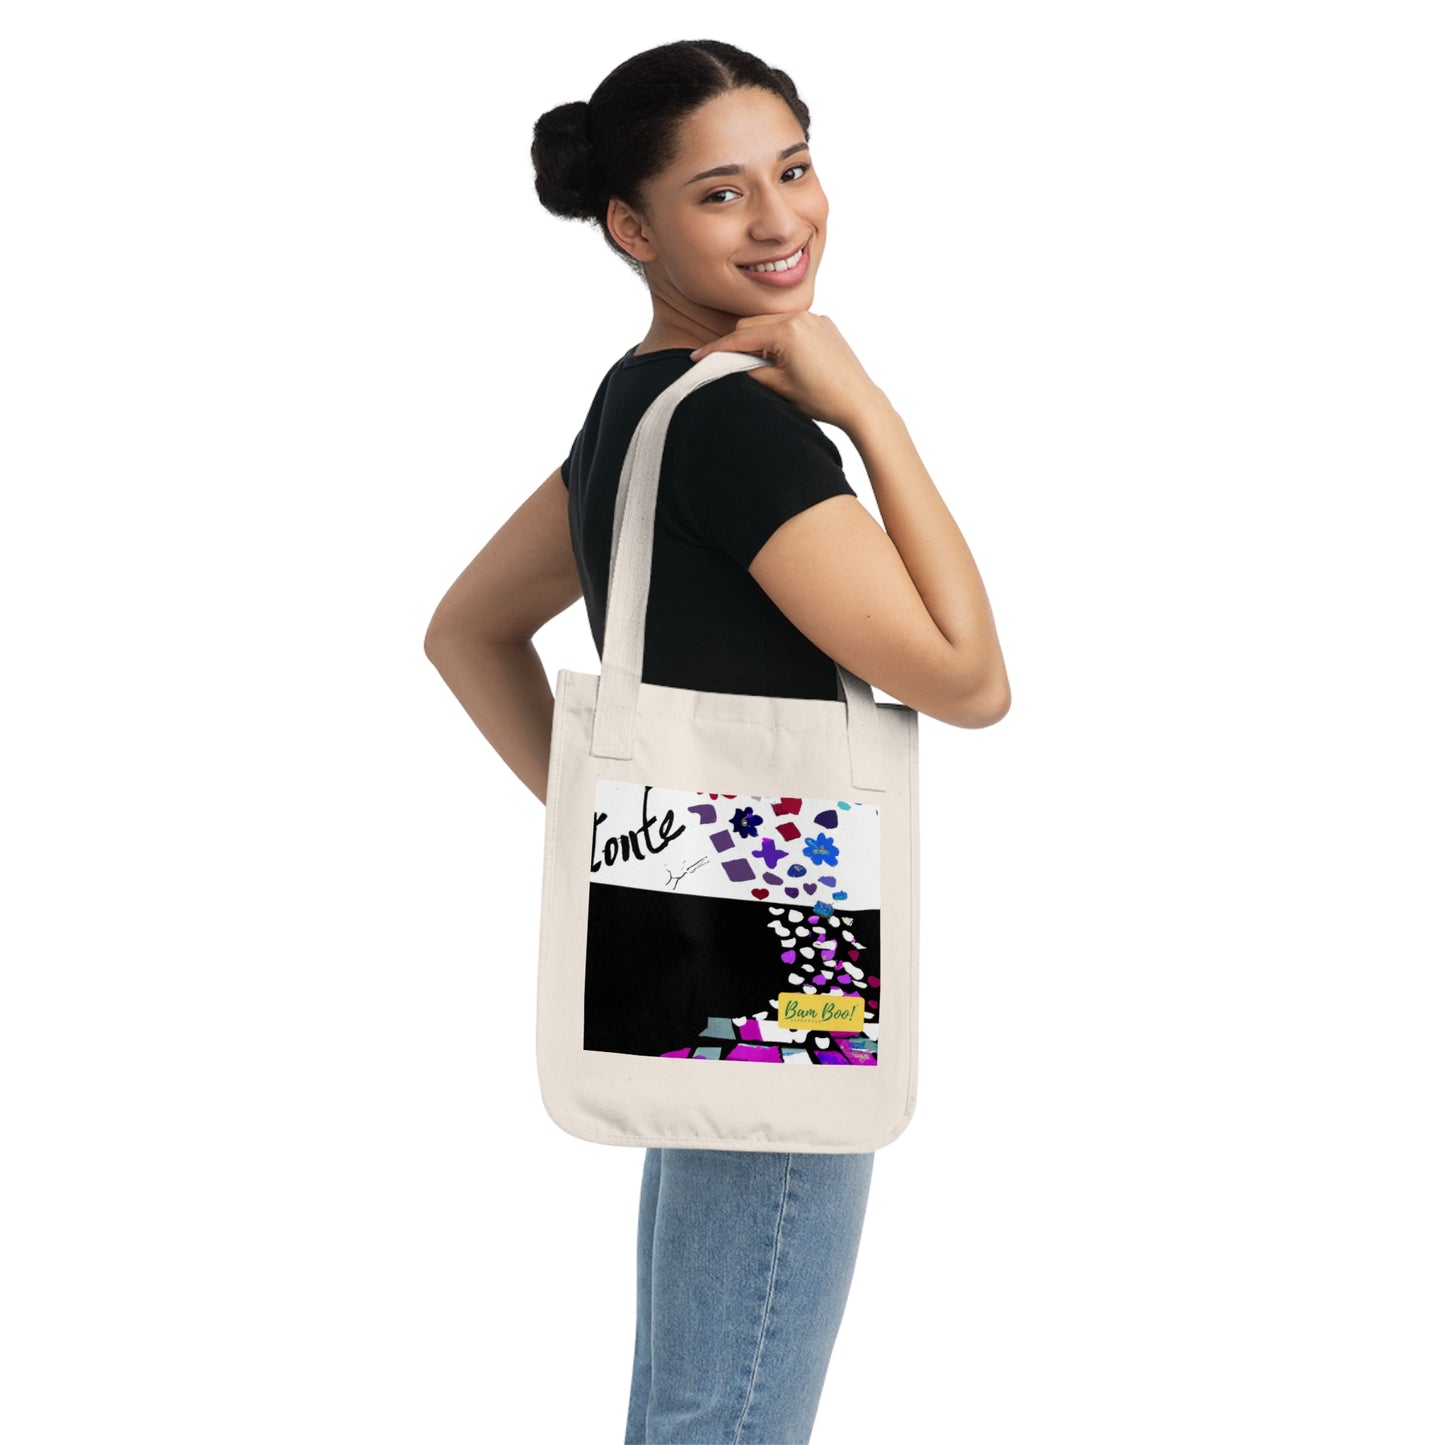 "Unity in Contrast: Exploring Beauty through Creative Collage" - Bam Boo! Lifestyle Eco-friendly Tote Bag